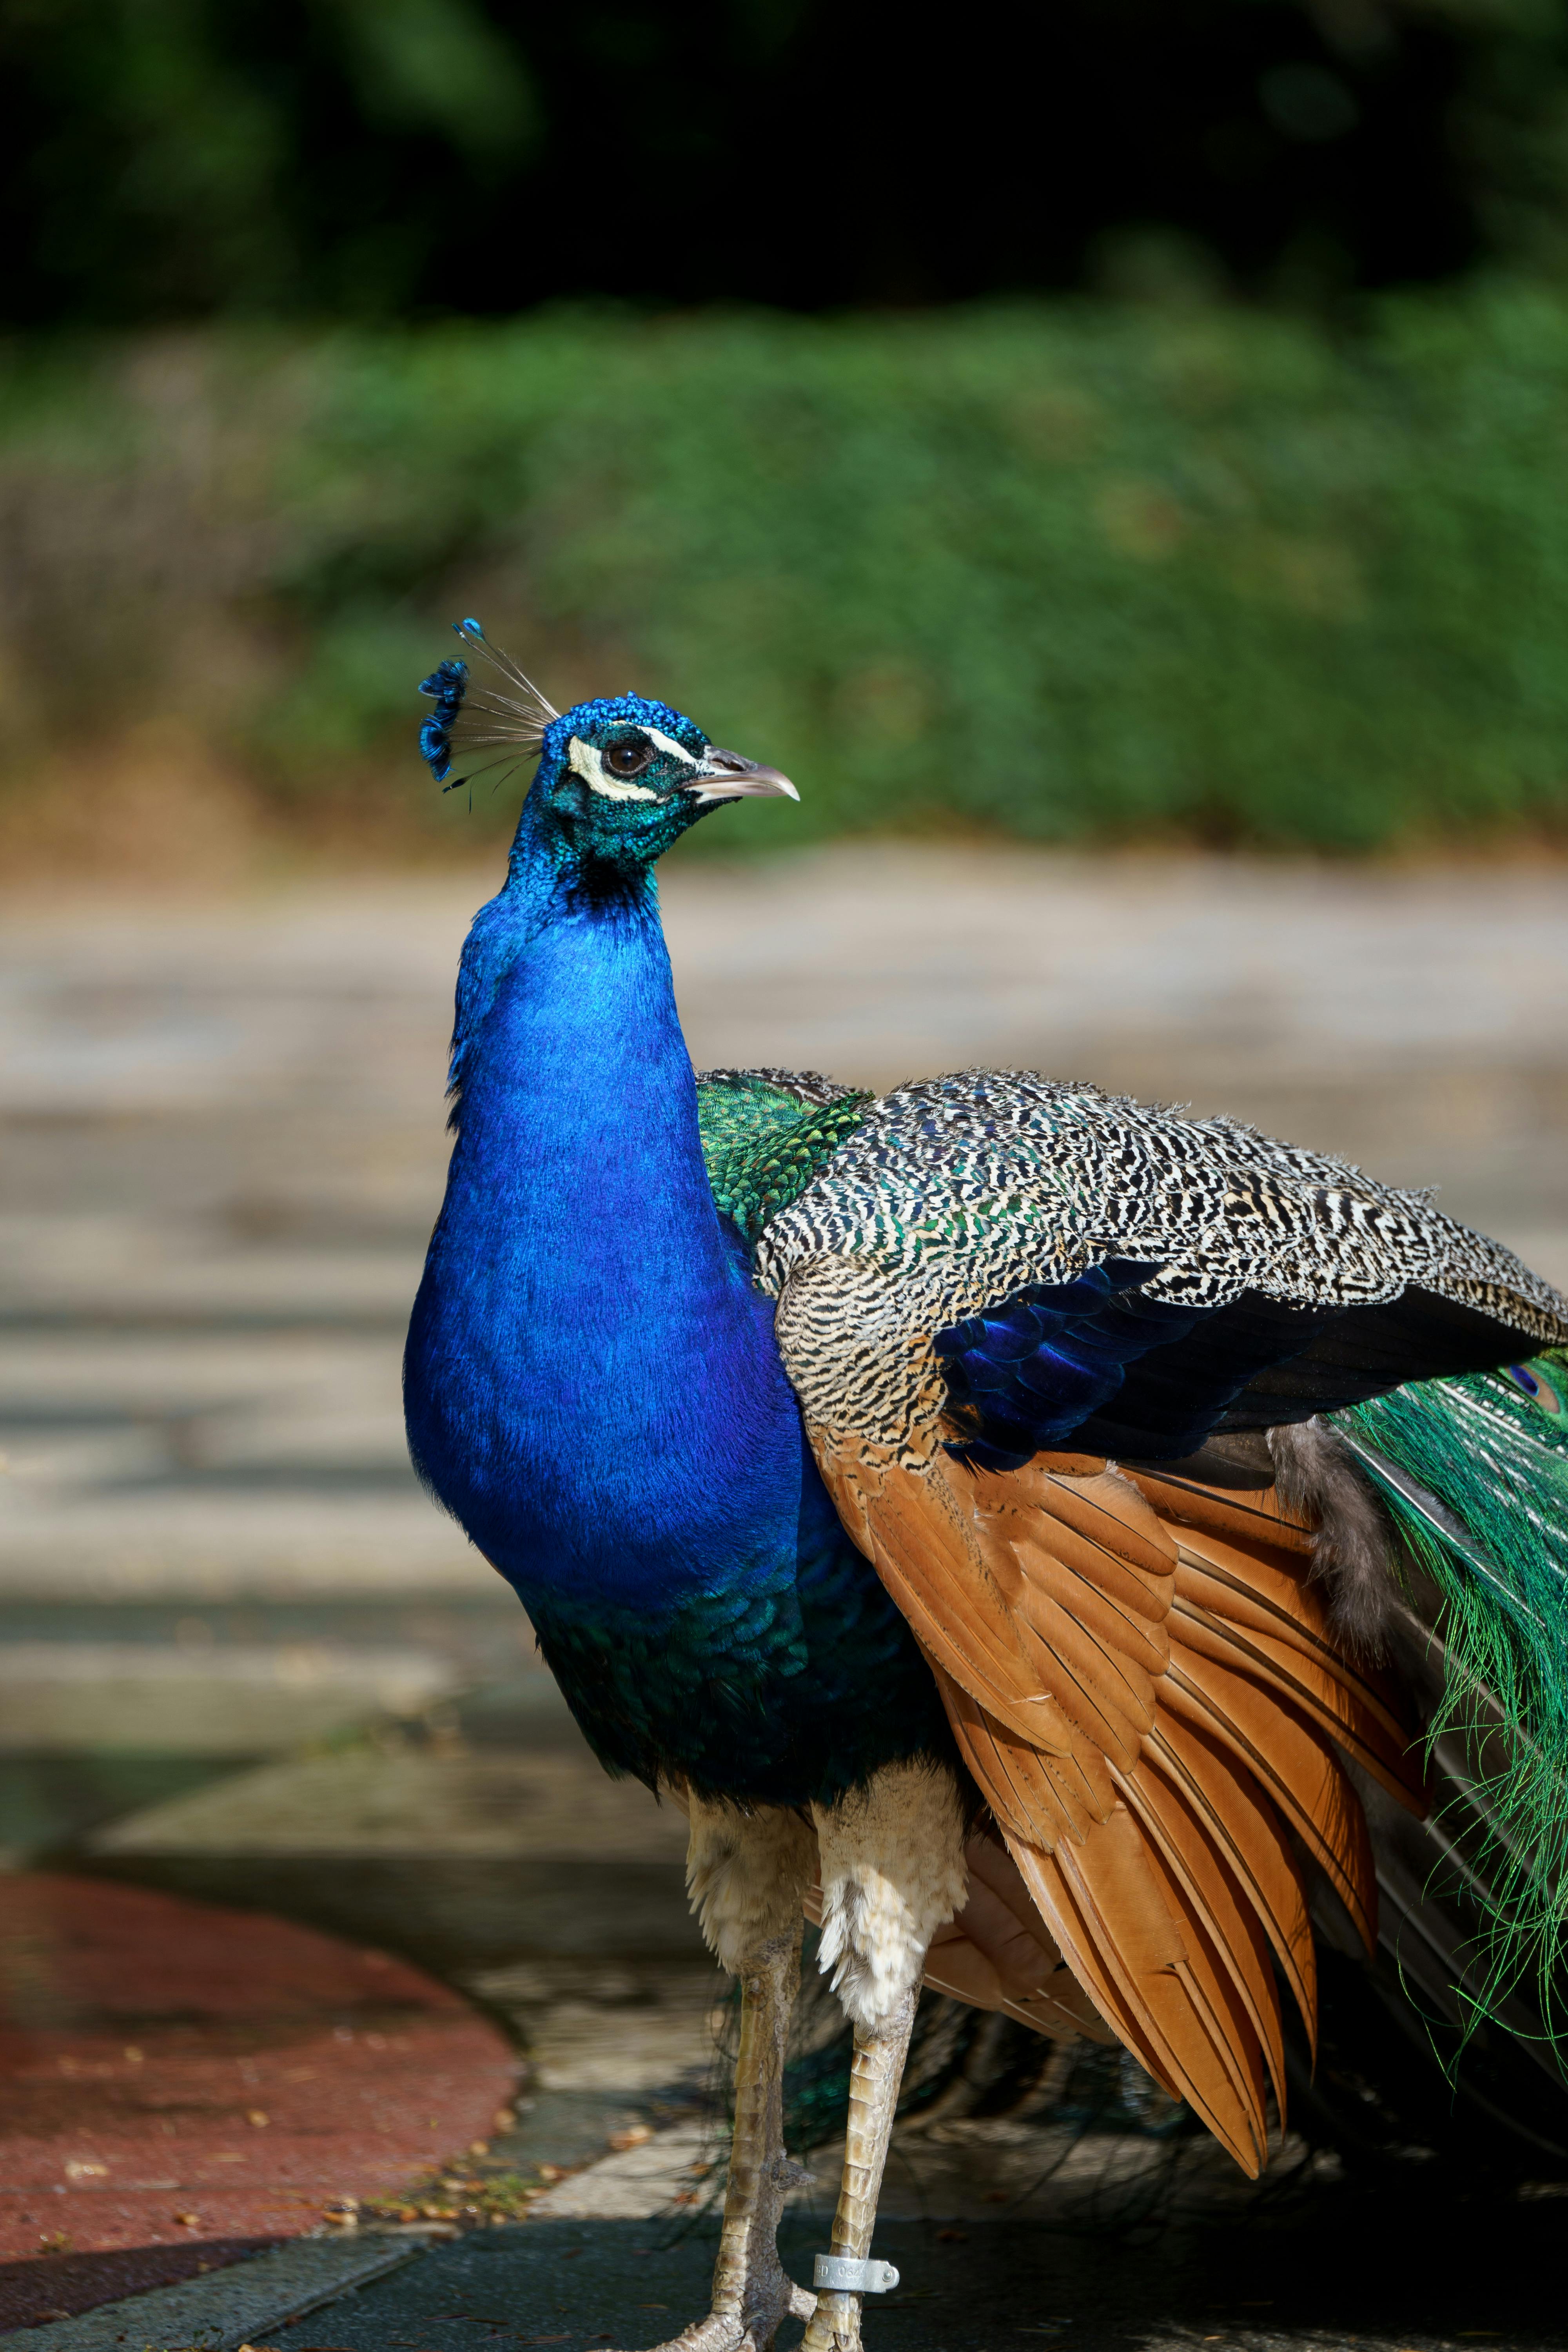 a peacock is standing on a sidewalk